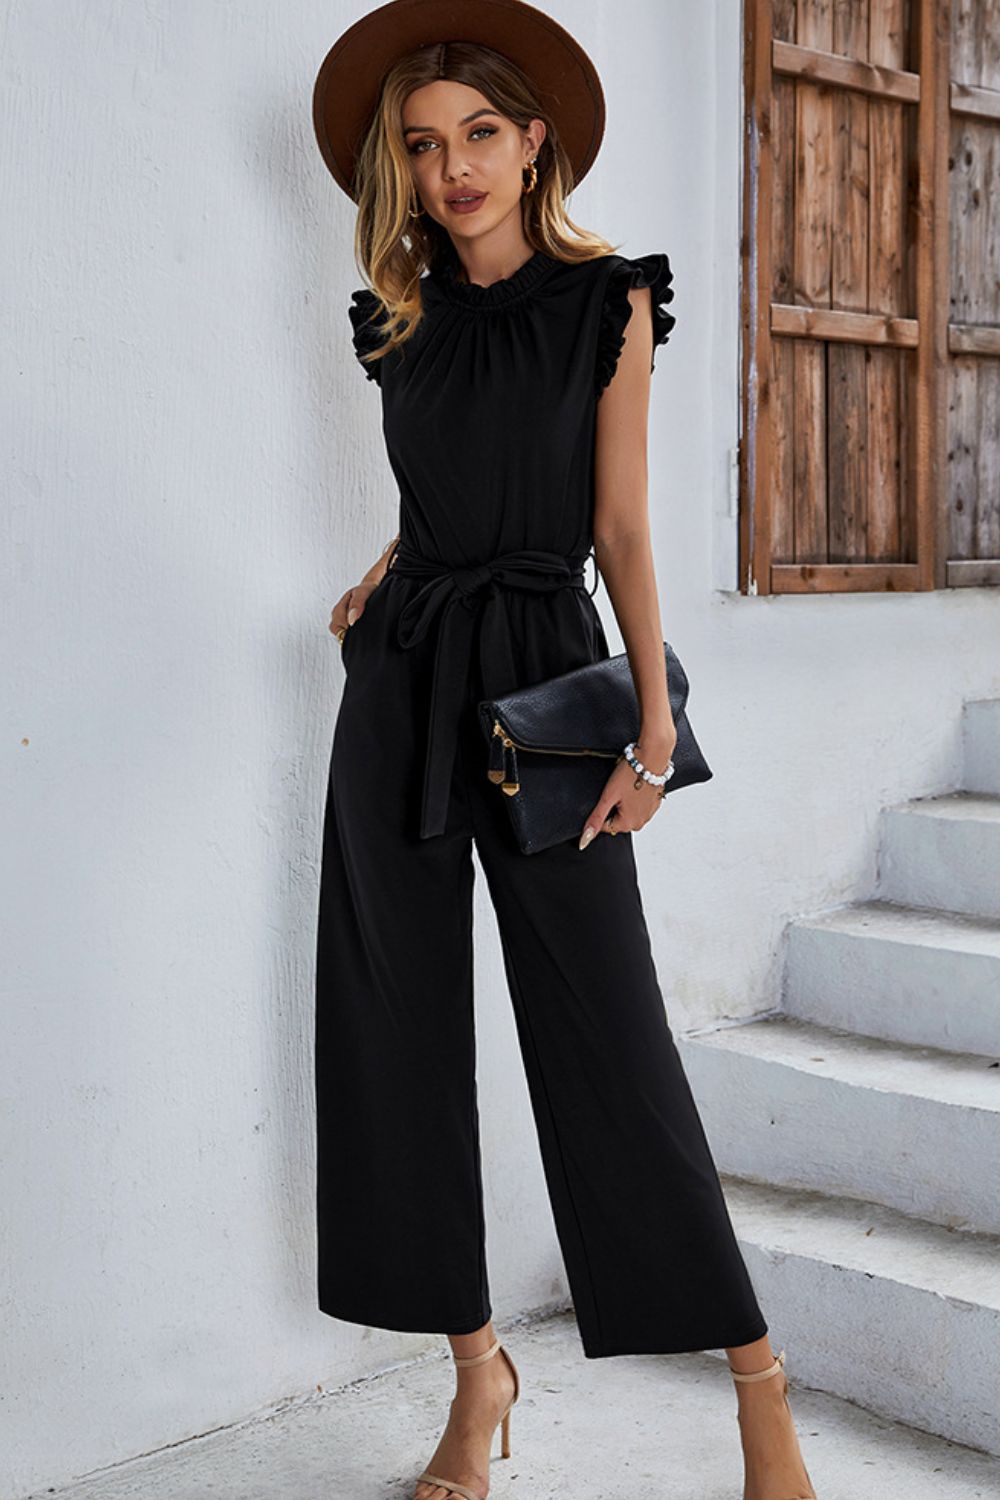 Butterfly Sleeve Tie Waist Jumpsuit The Stout Steer